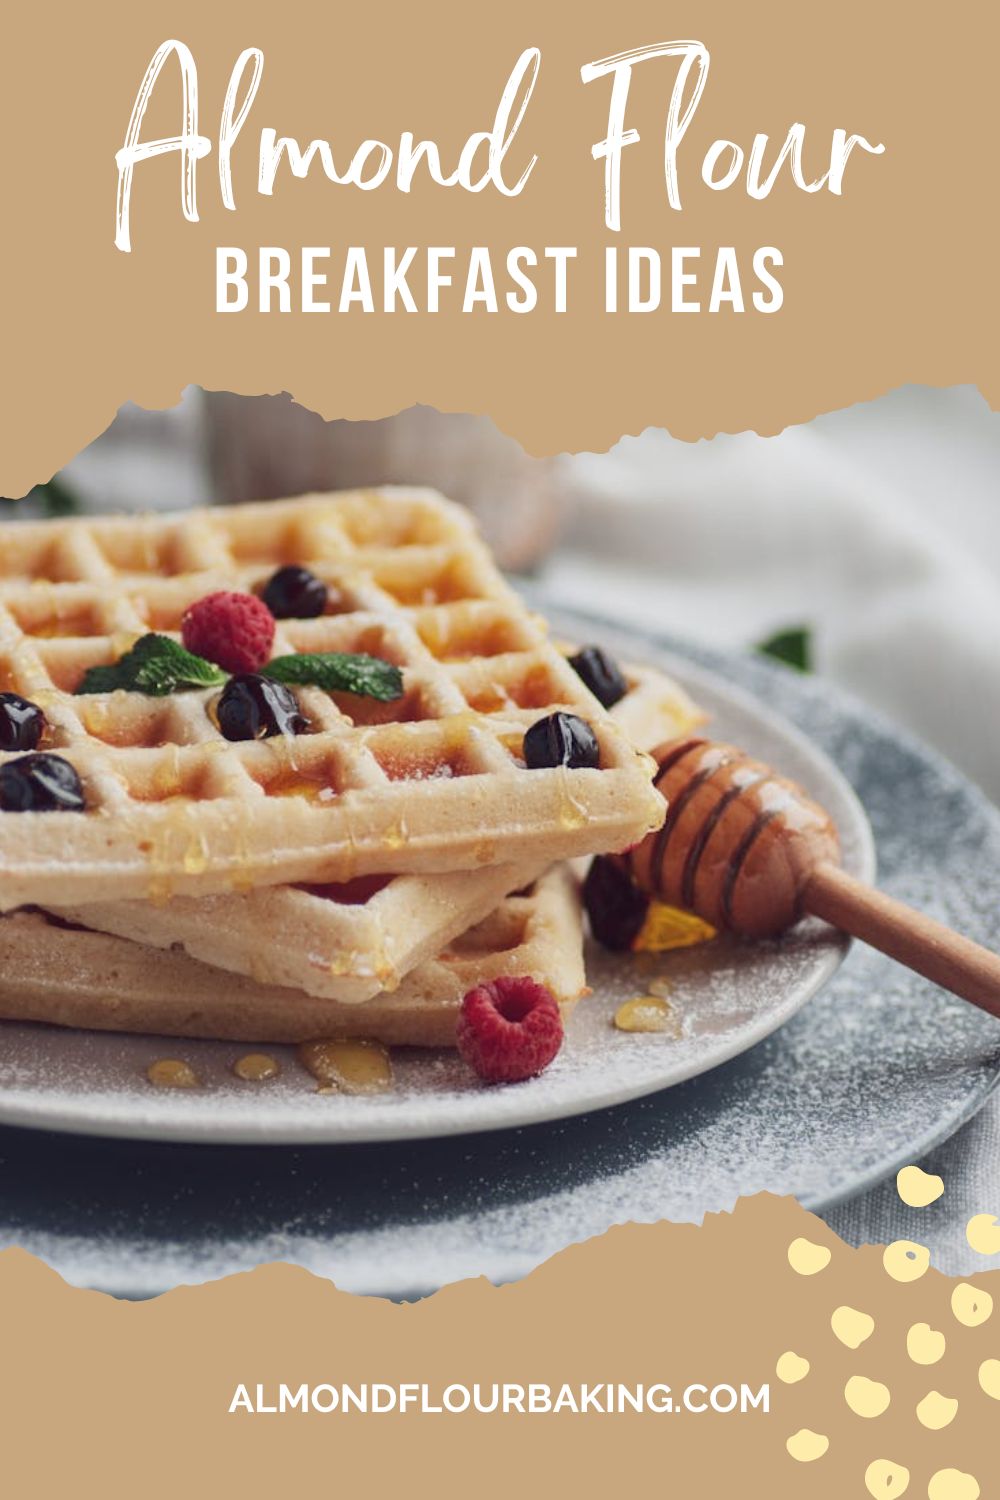 Starting your day with a nutritious and delicious breakfast sets the tone for a productive day. Check out these delicious almond flour breakfast ideas.